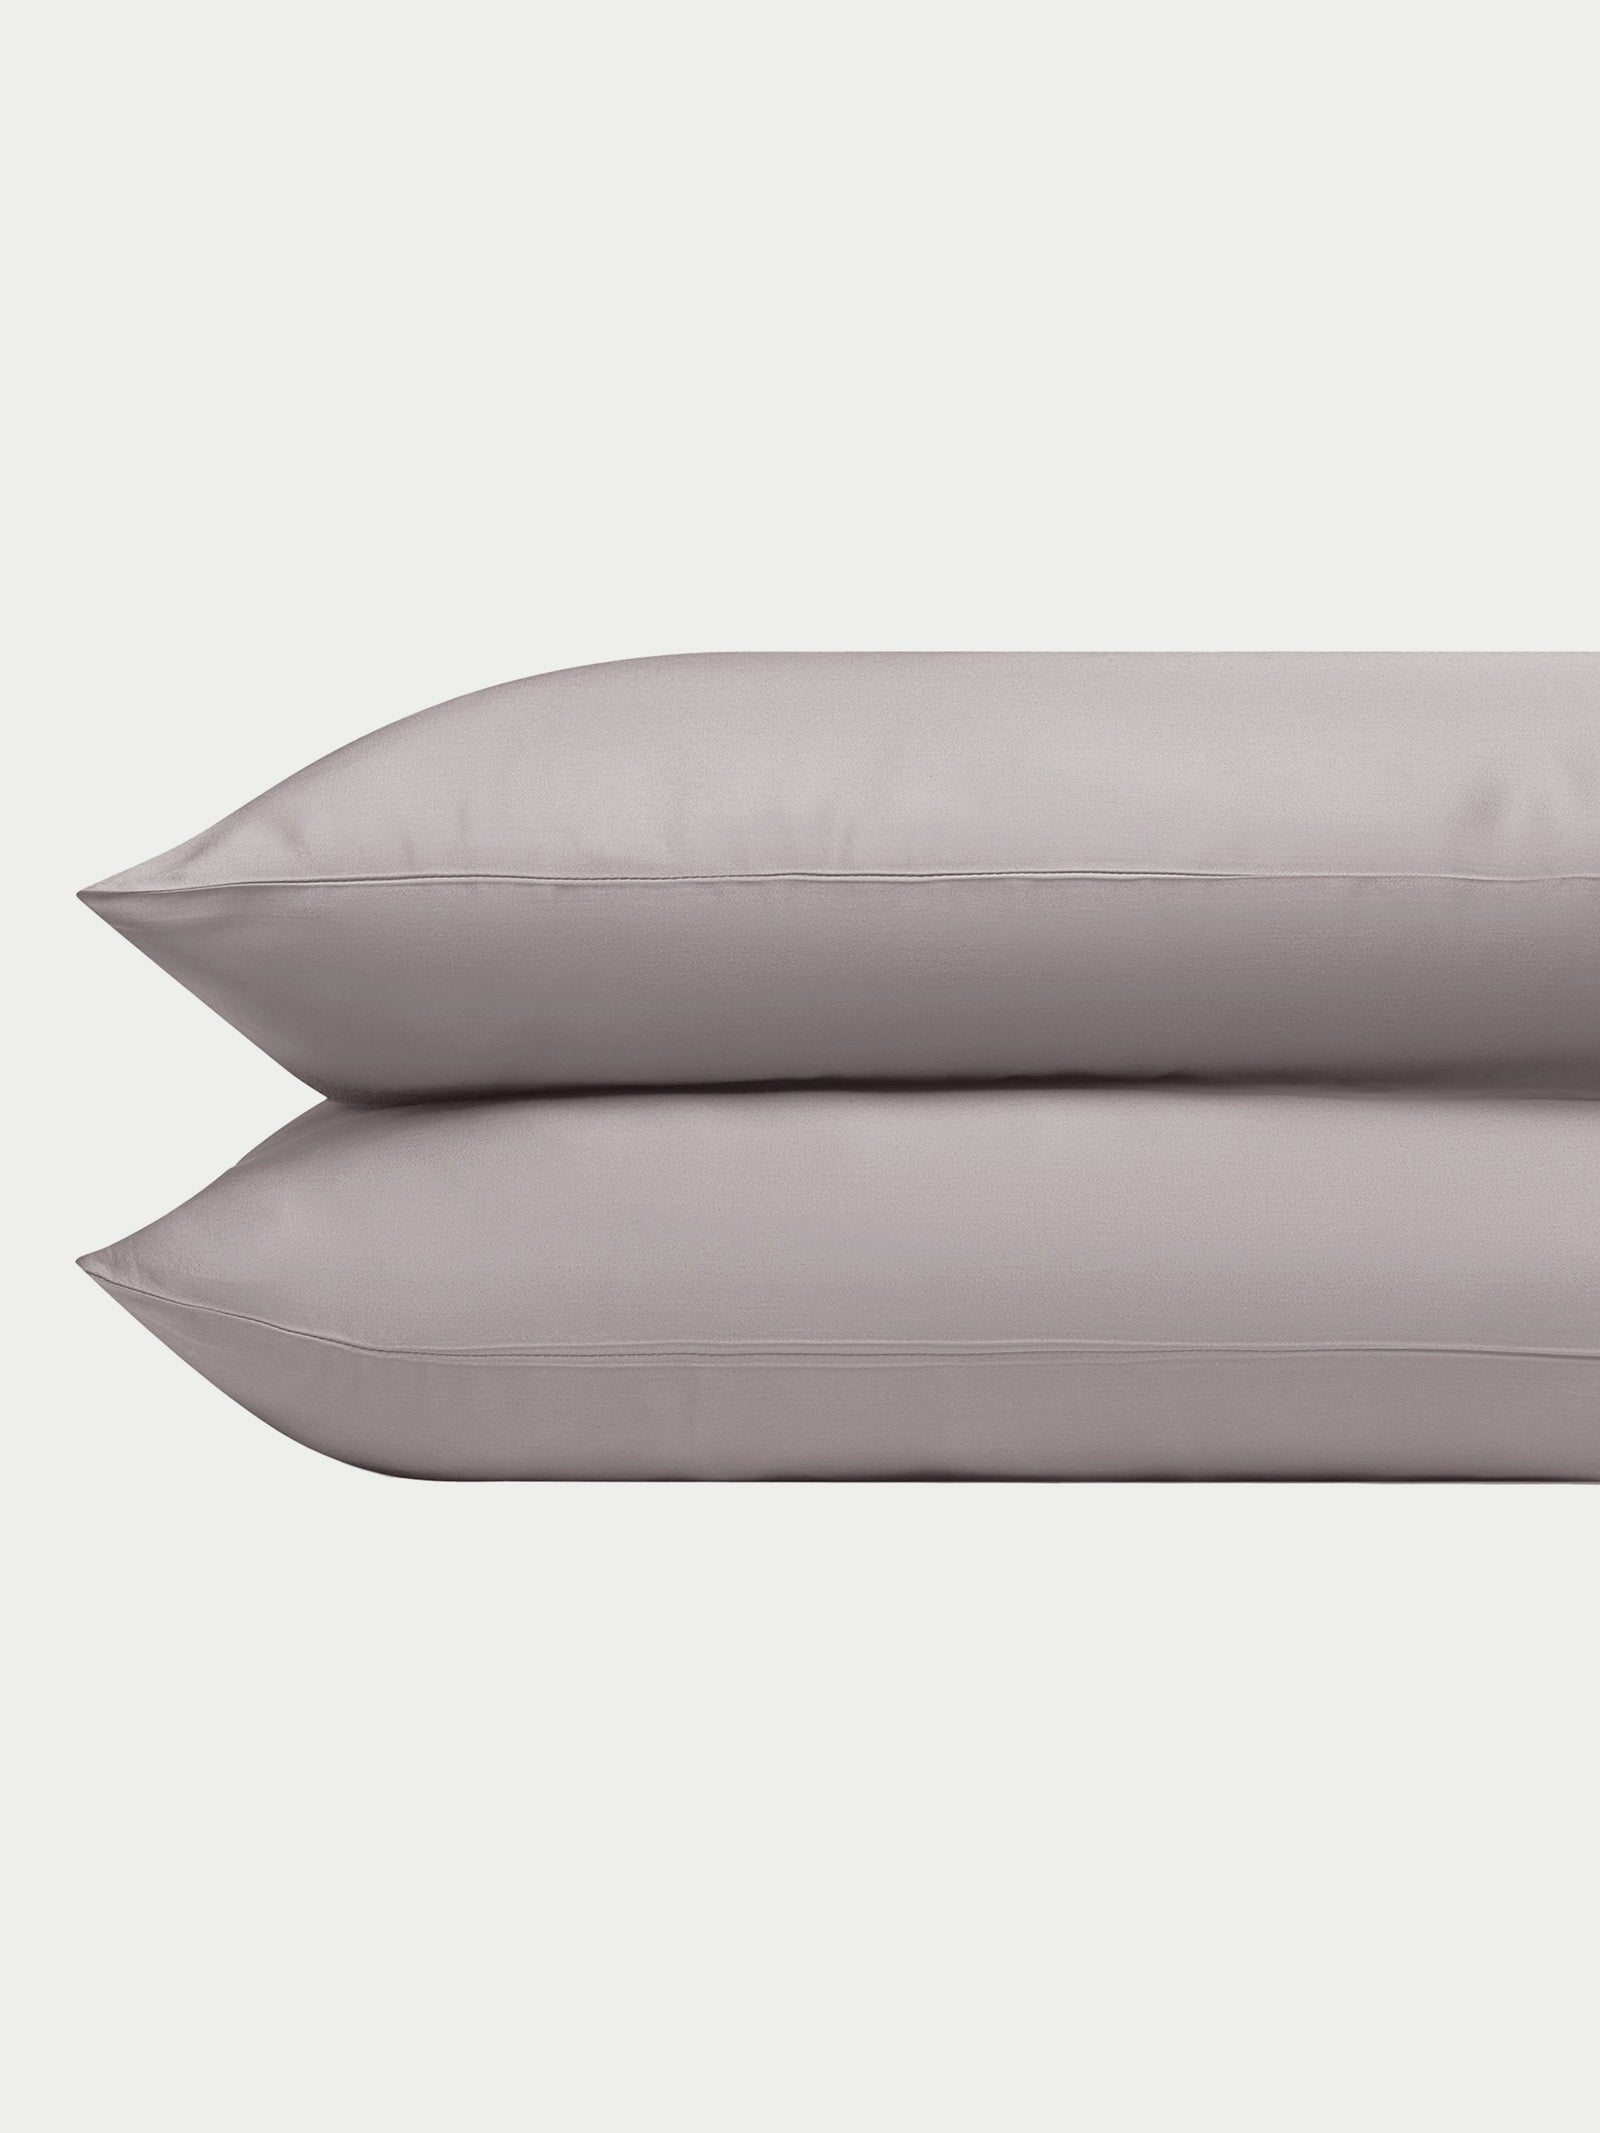 Two stone pillowcases with a plain background standard/king/body